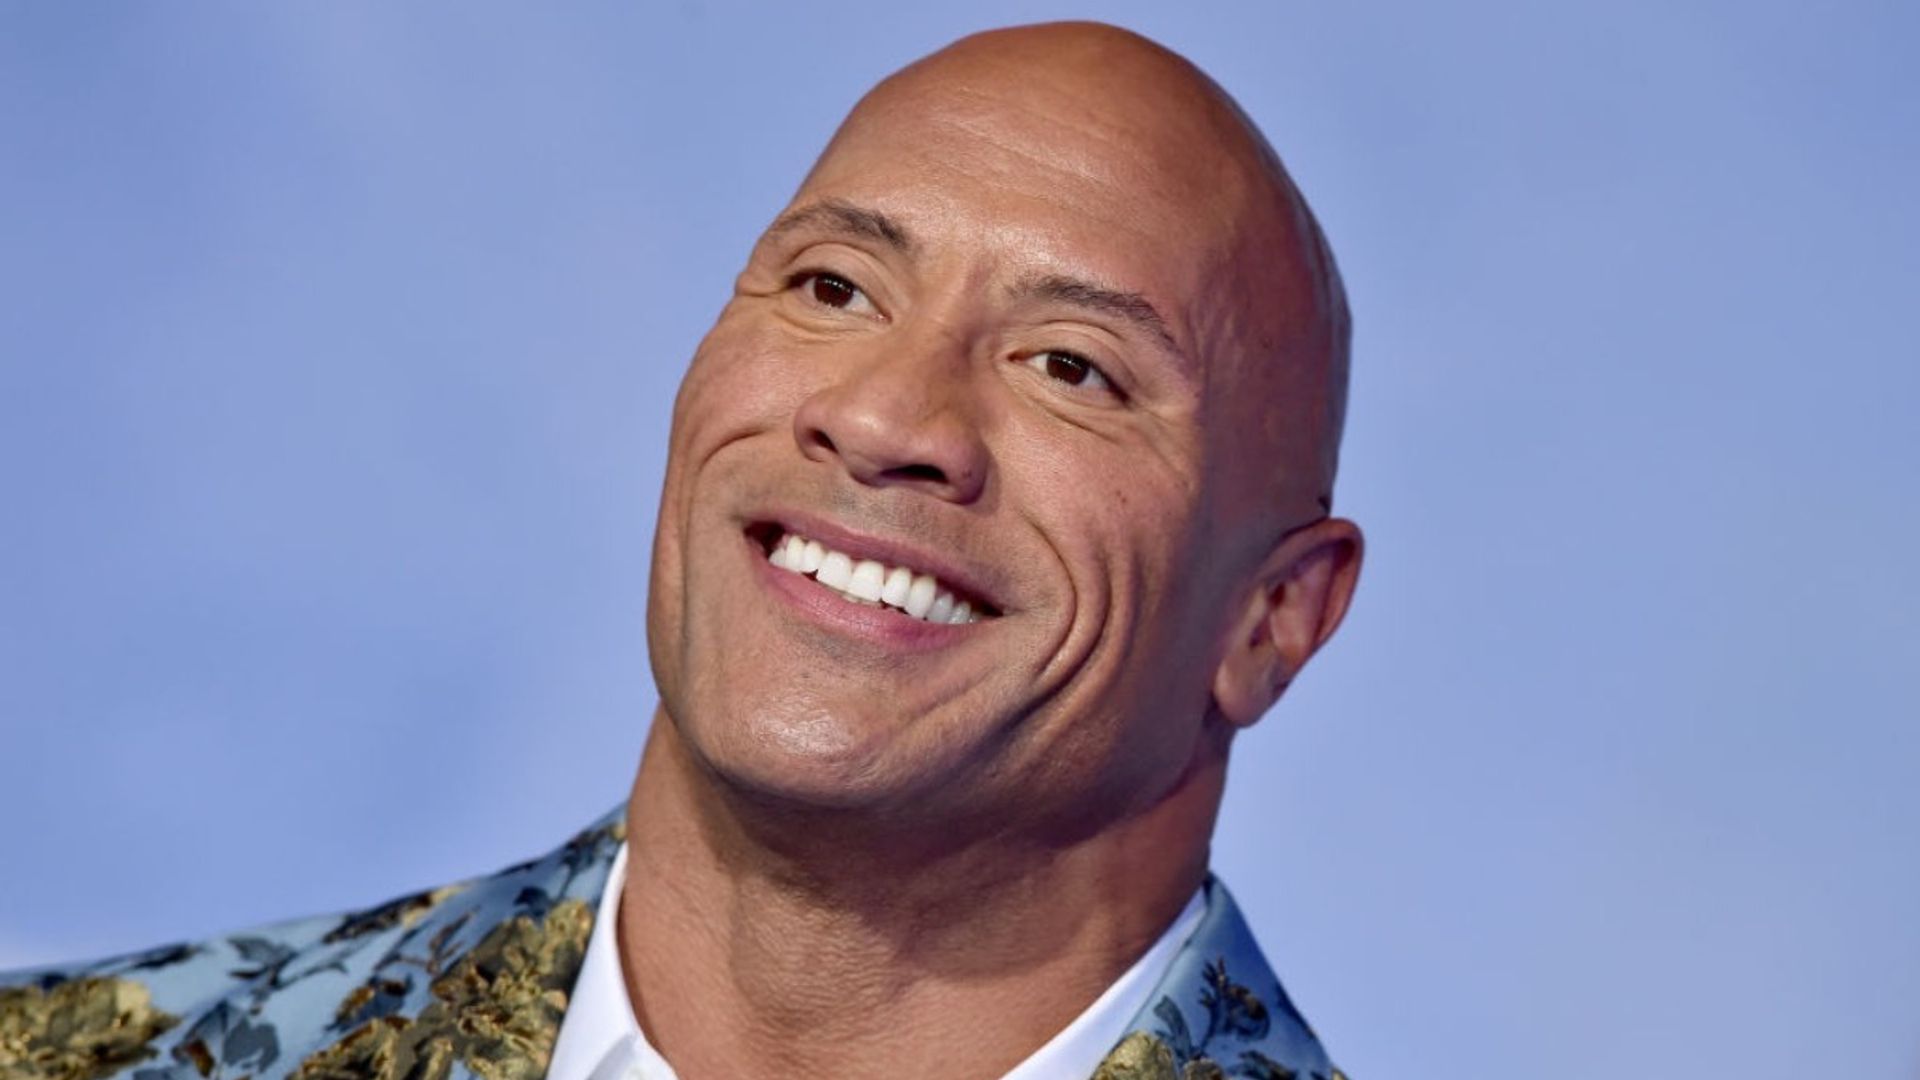 The Rock can't believe how much this police officer looks like him – and you won't, either